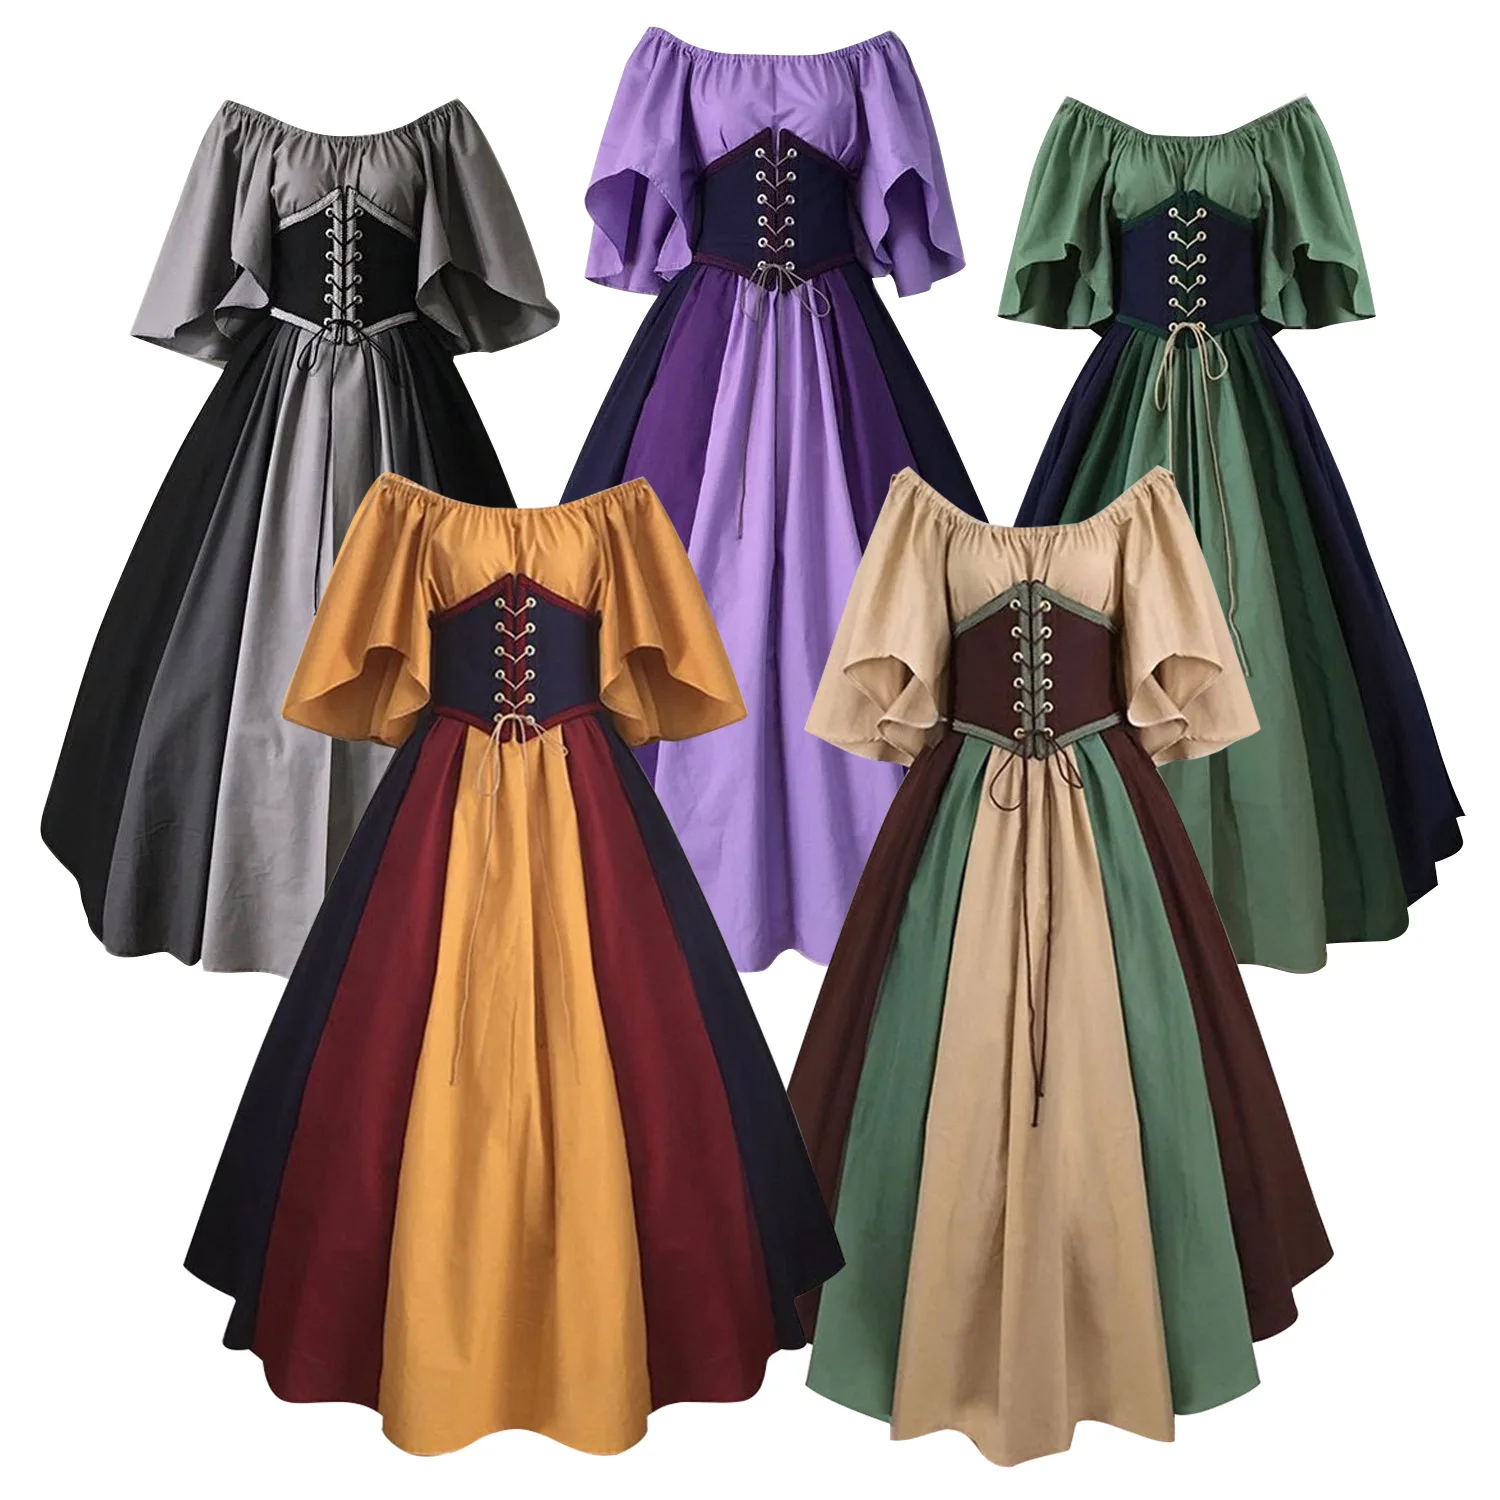 

Palace Medieval Costumes Women Dress Vintage Victoria Lace Up Carnival Party Long Dress Robe Cosplay Clothing Lady Corset Dress